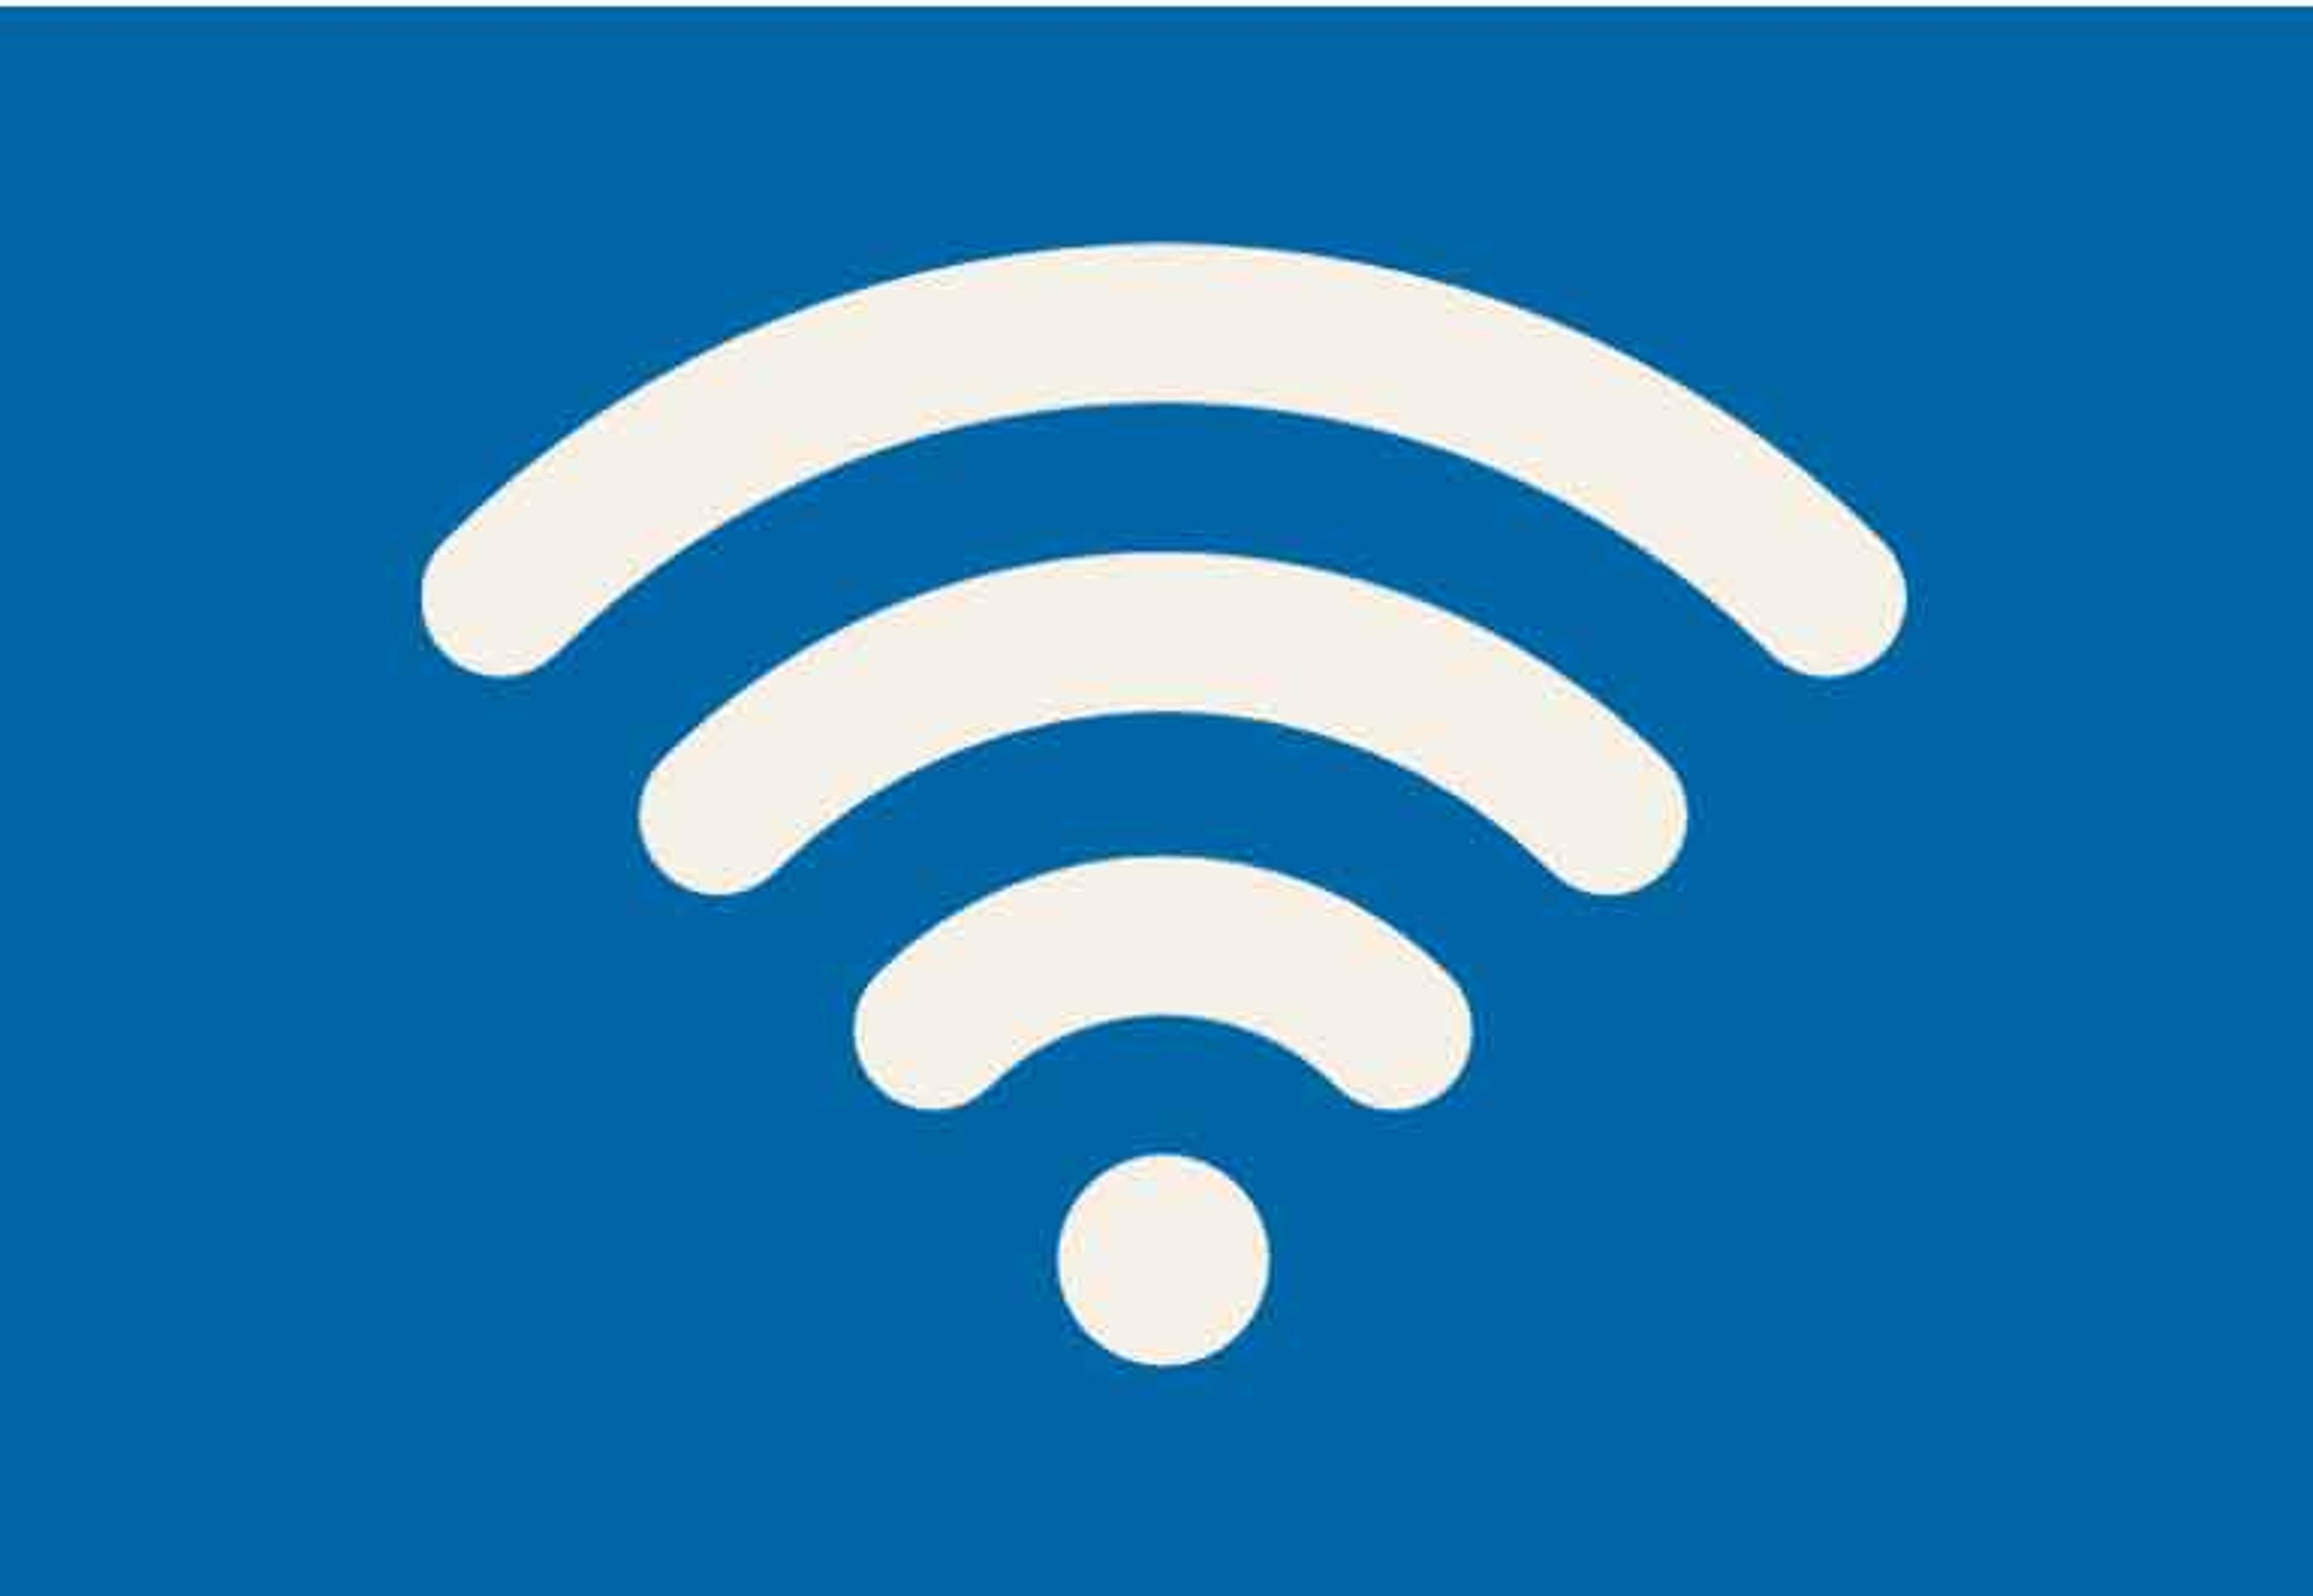 Wifi and internet at Karme Choling meditation retreat center, Vermont